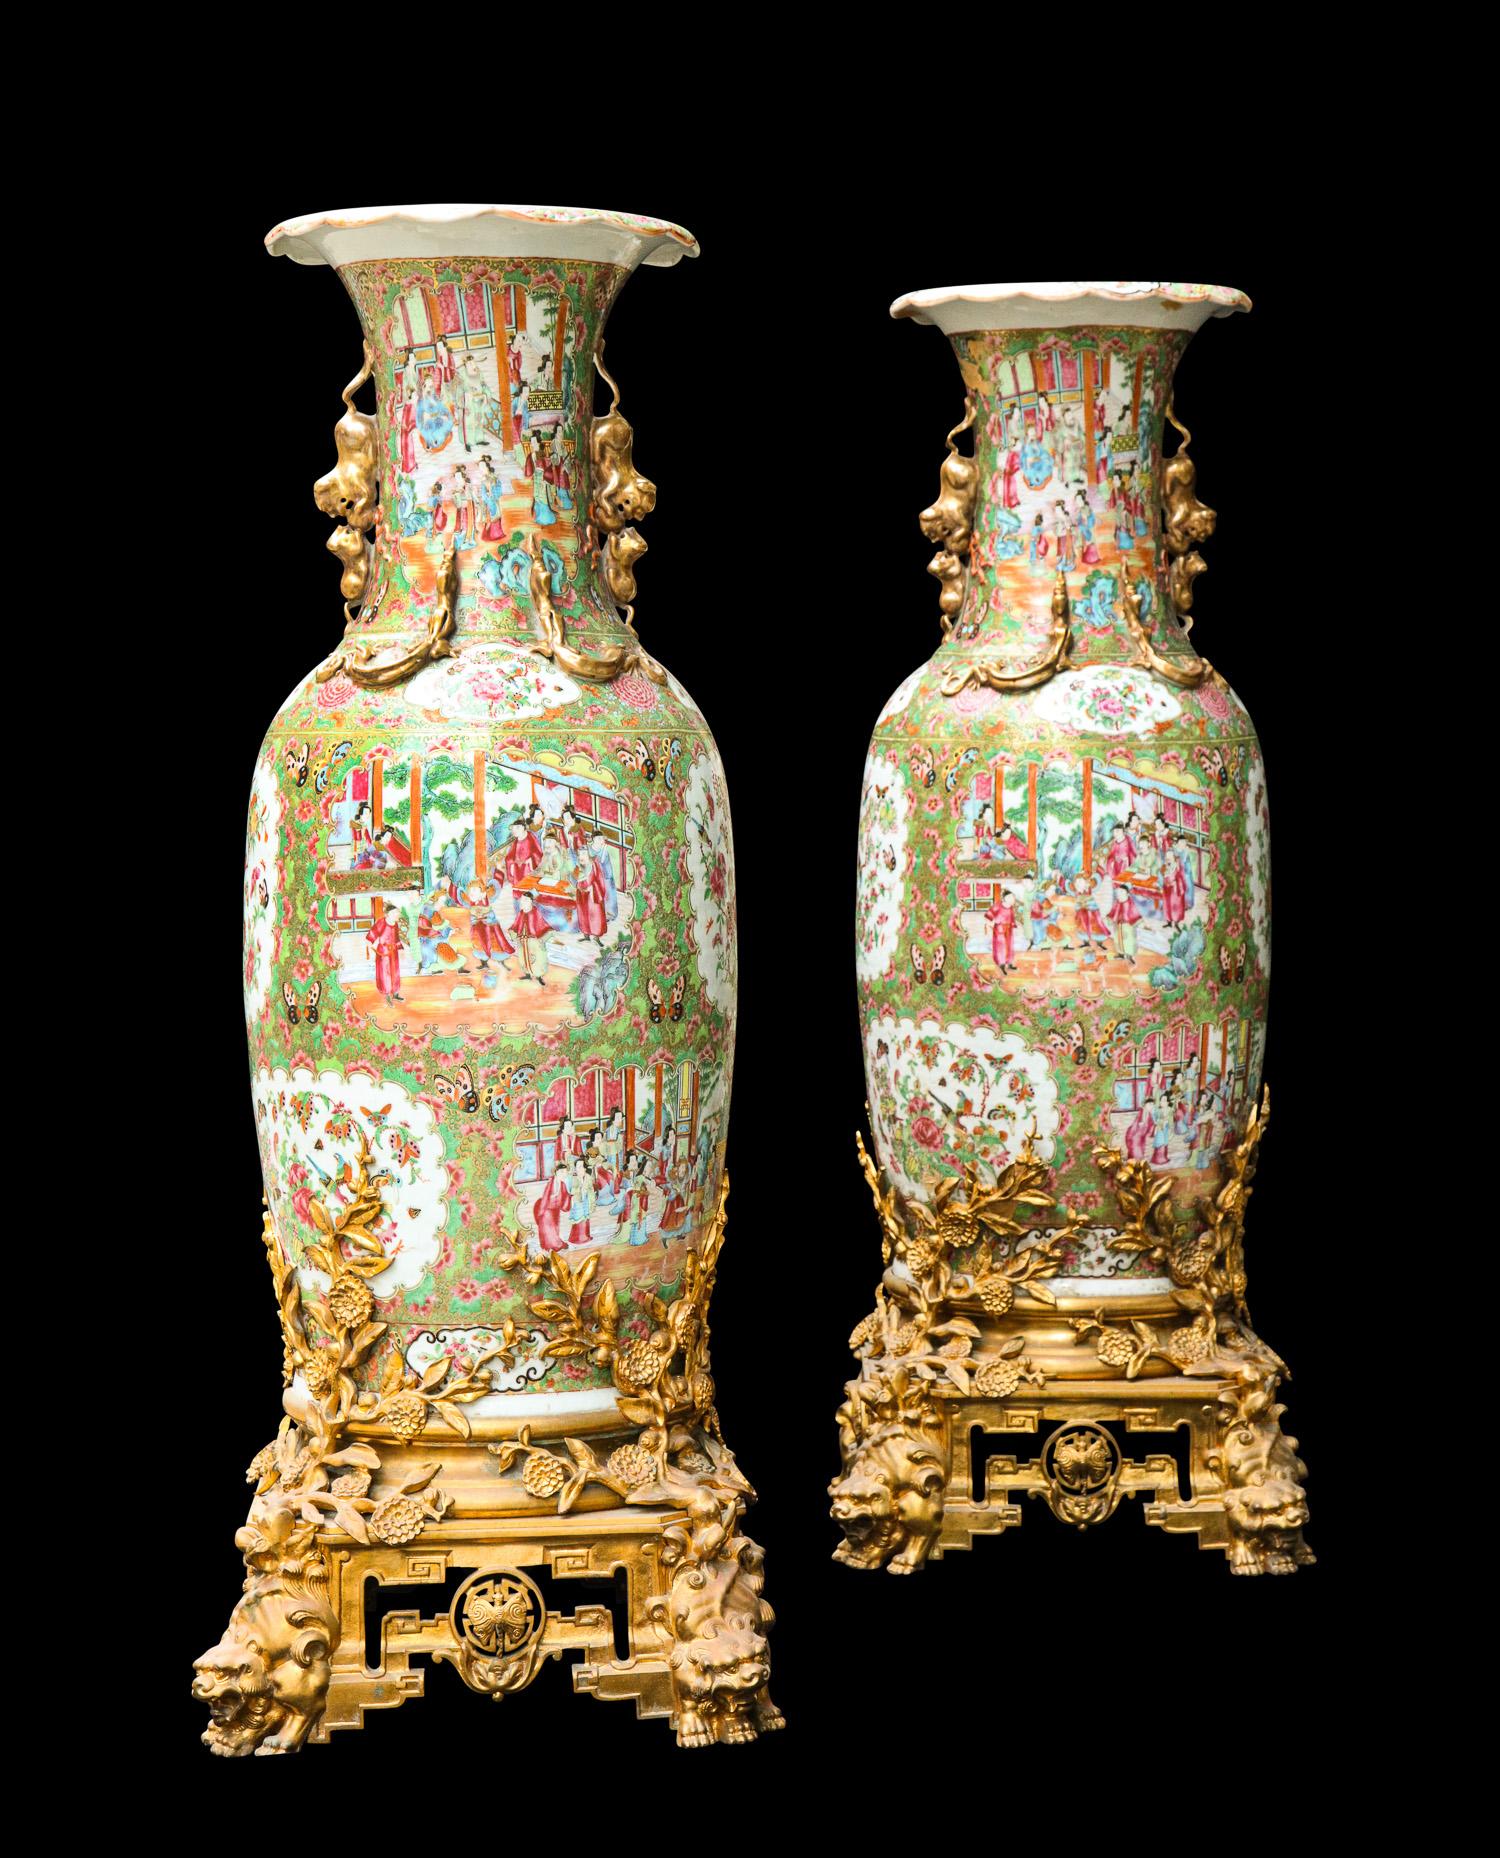 Chinoiserie Pair of Palatial Gilt Bronze Mounted Chinese Export Famille Rose Porcelain Vases